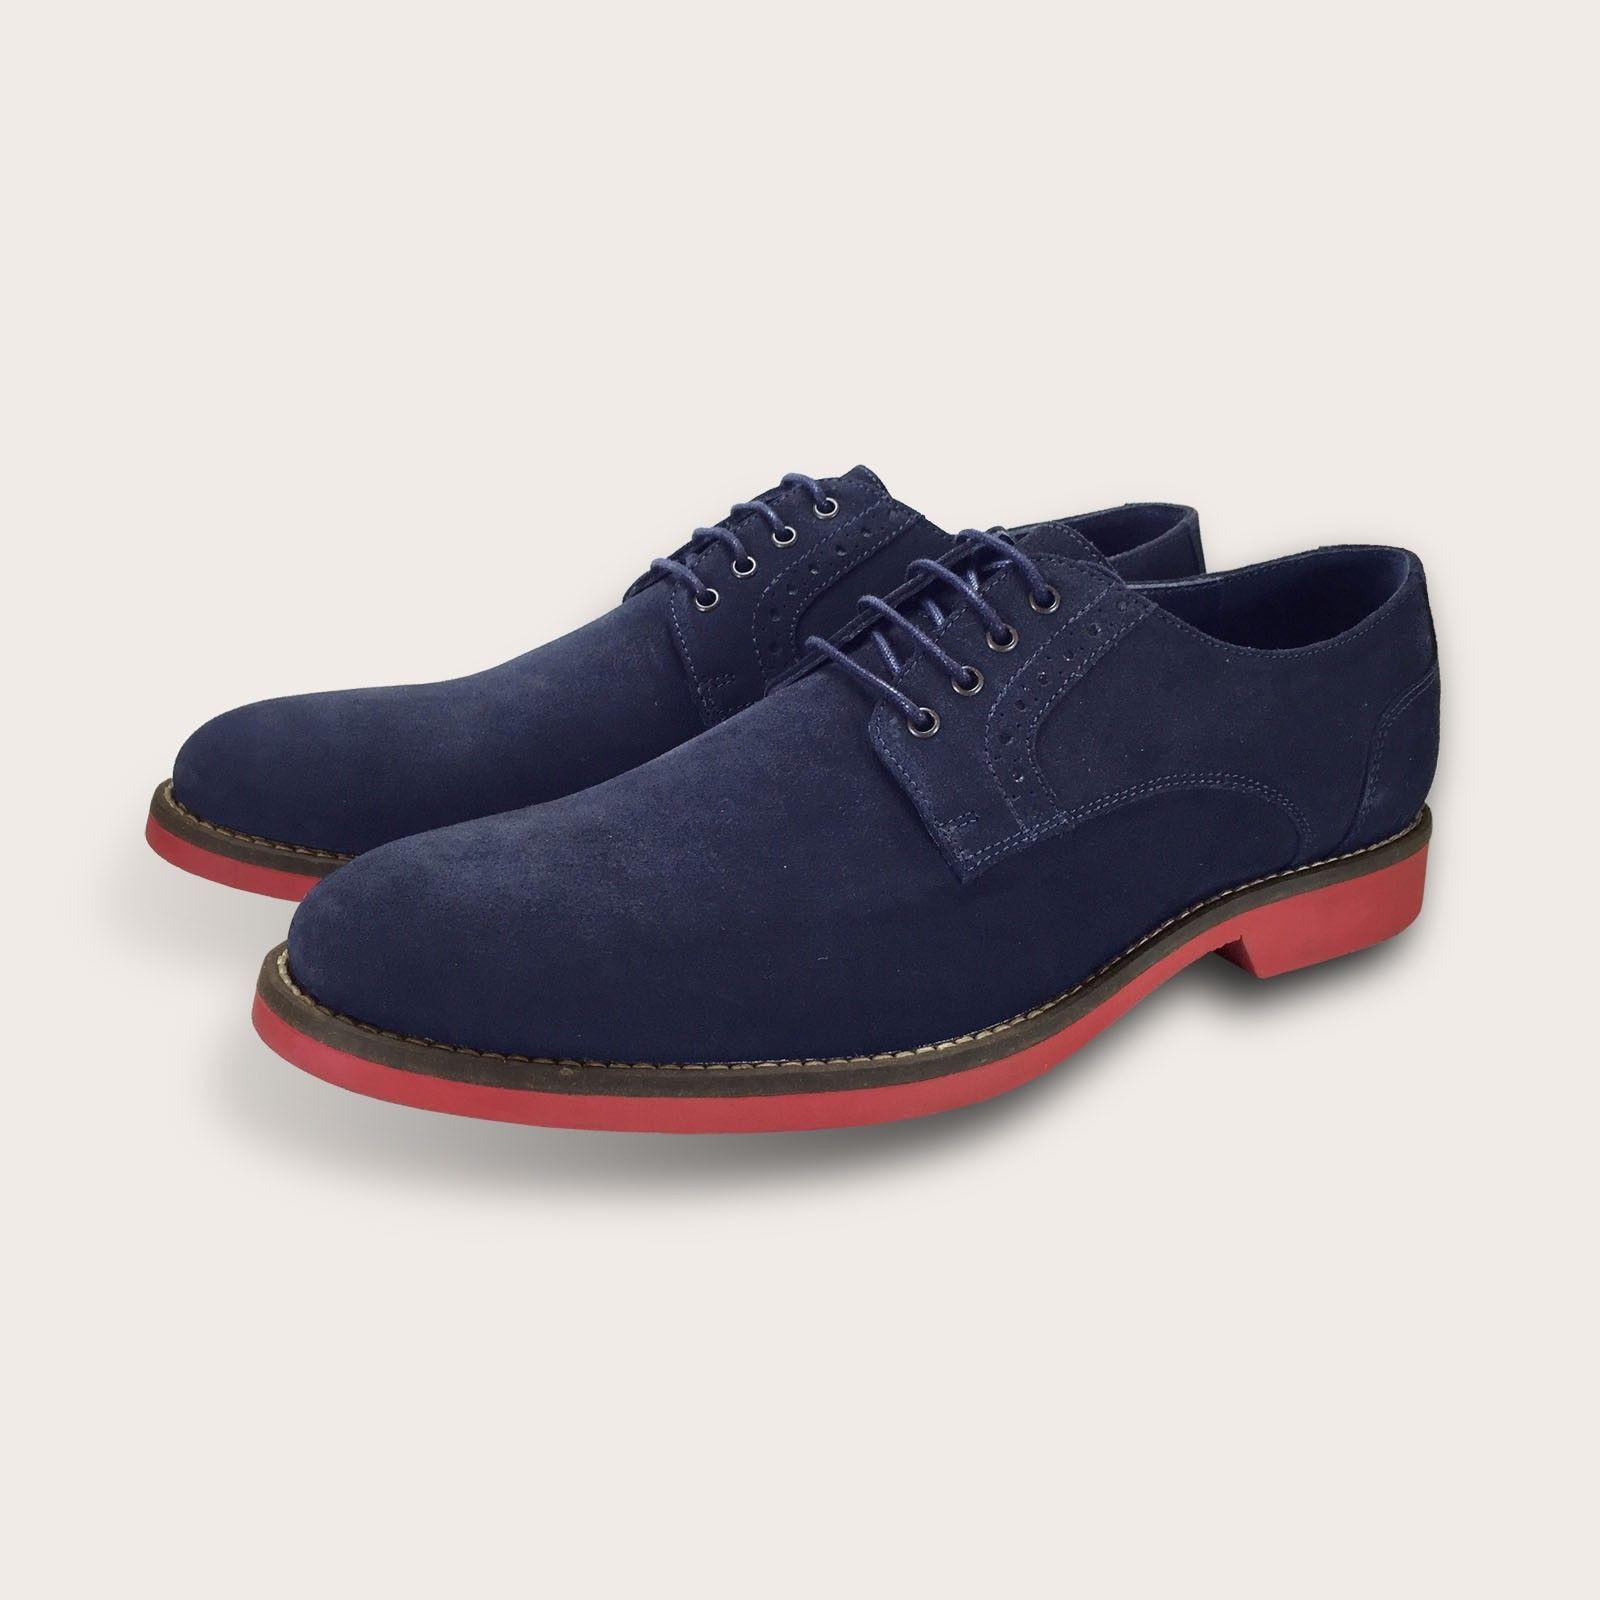 Red and Blue Shoes Logo - Men's Blue Suede Shoes with Red Soles. Buy Shoes Online